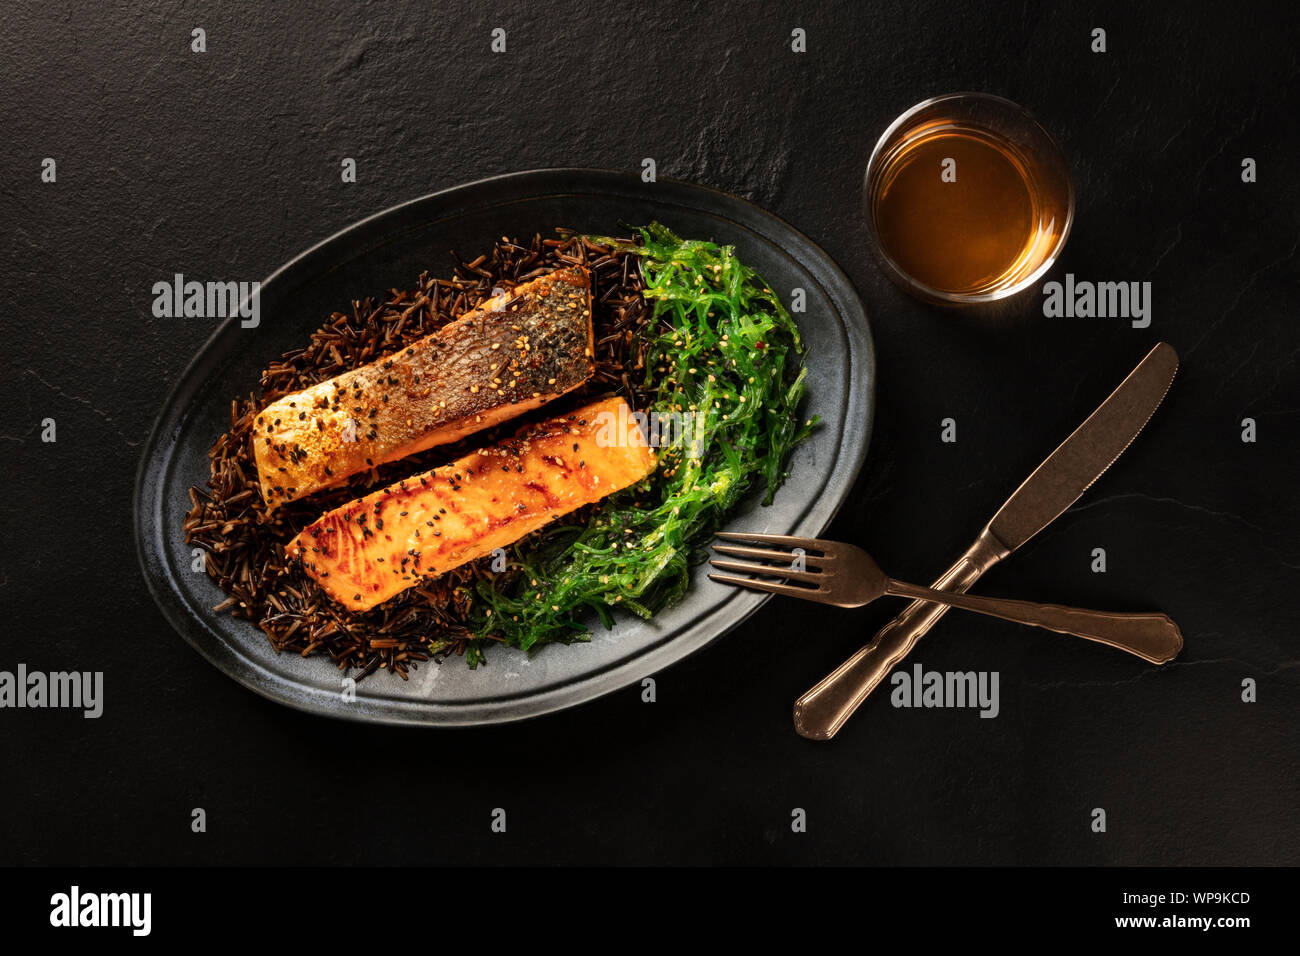 Salmon with sesame seeds, wakame seaweed and wild rice, shot from the top with a glass of white wine on a black background Stock Photo